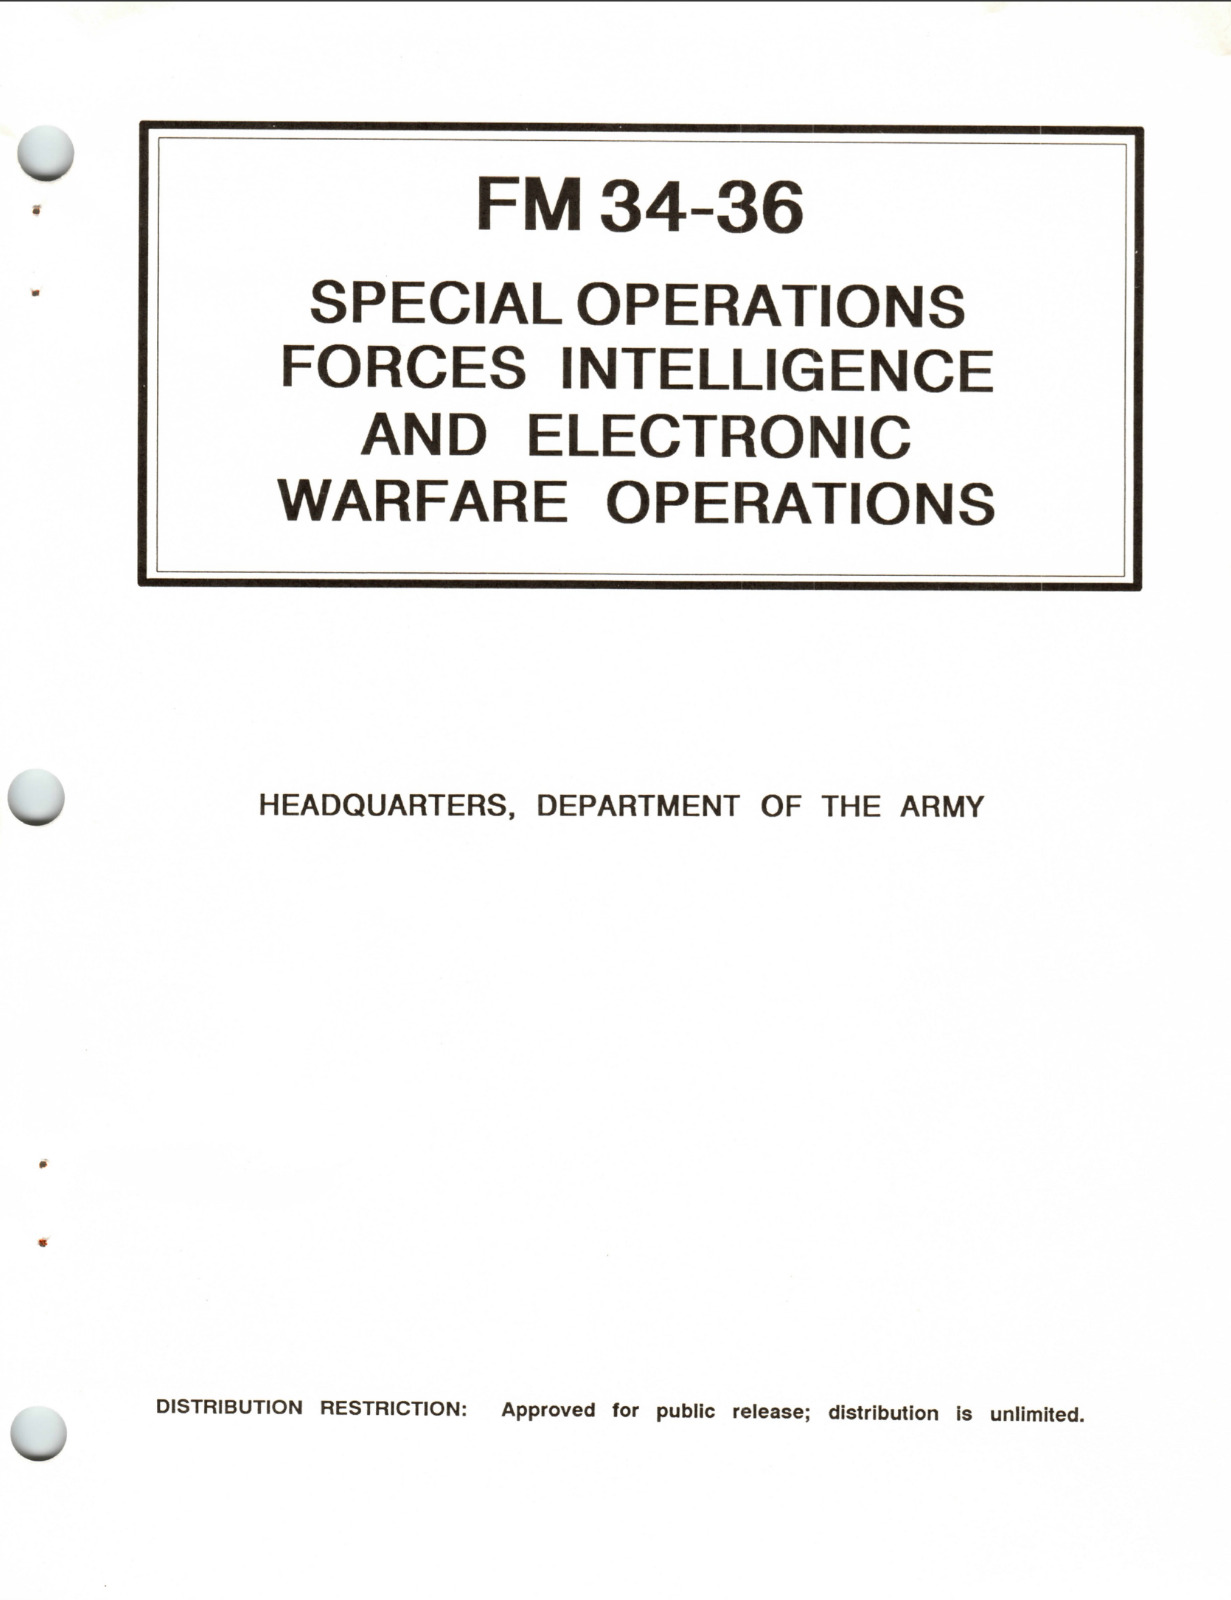 210 Page FM 34-36 SPECIAL FORCES INTELLIGENCE & ELECTRONIC WARFARE on Data CD